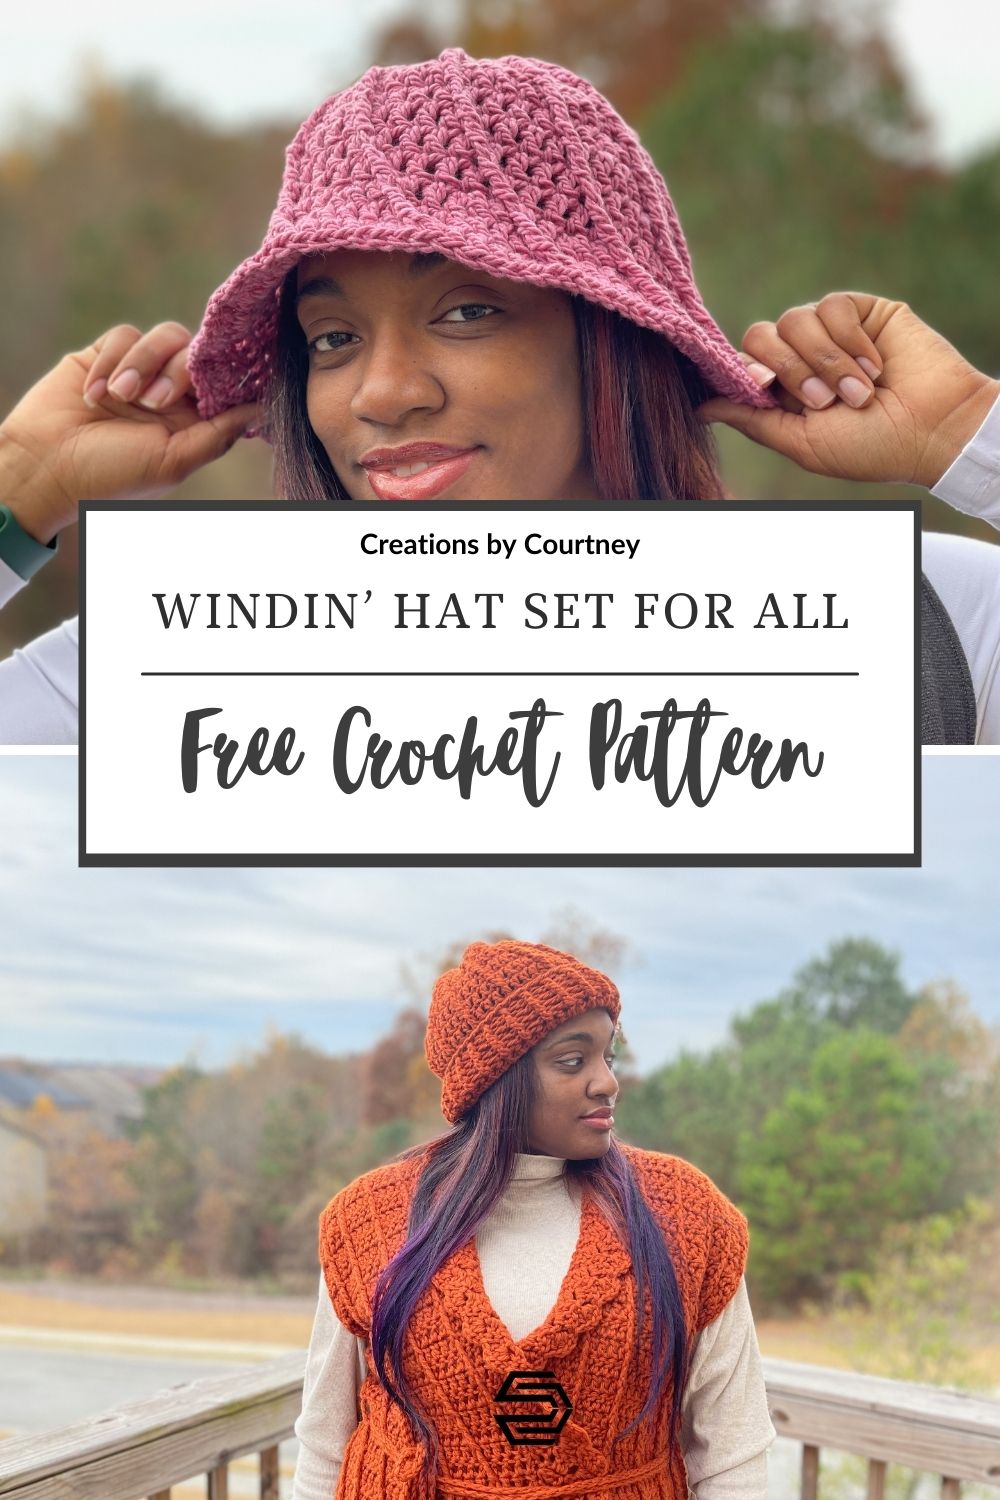 Whether you like beanies or bucket hats, these chunky crochet hats work for all! Made with bulky weight yarn, you can create stylish crochet accessories for all. Available in 4 sizes.